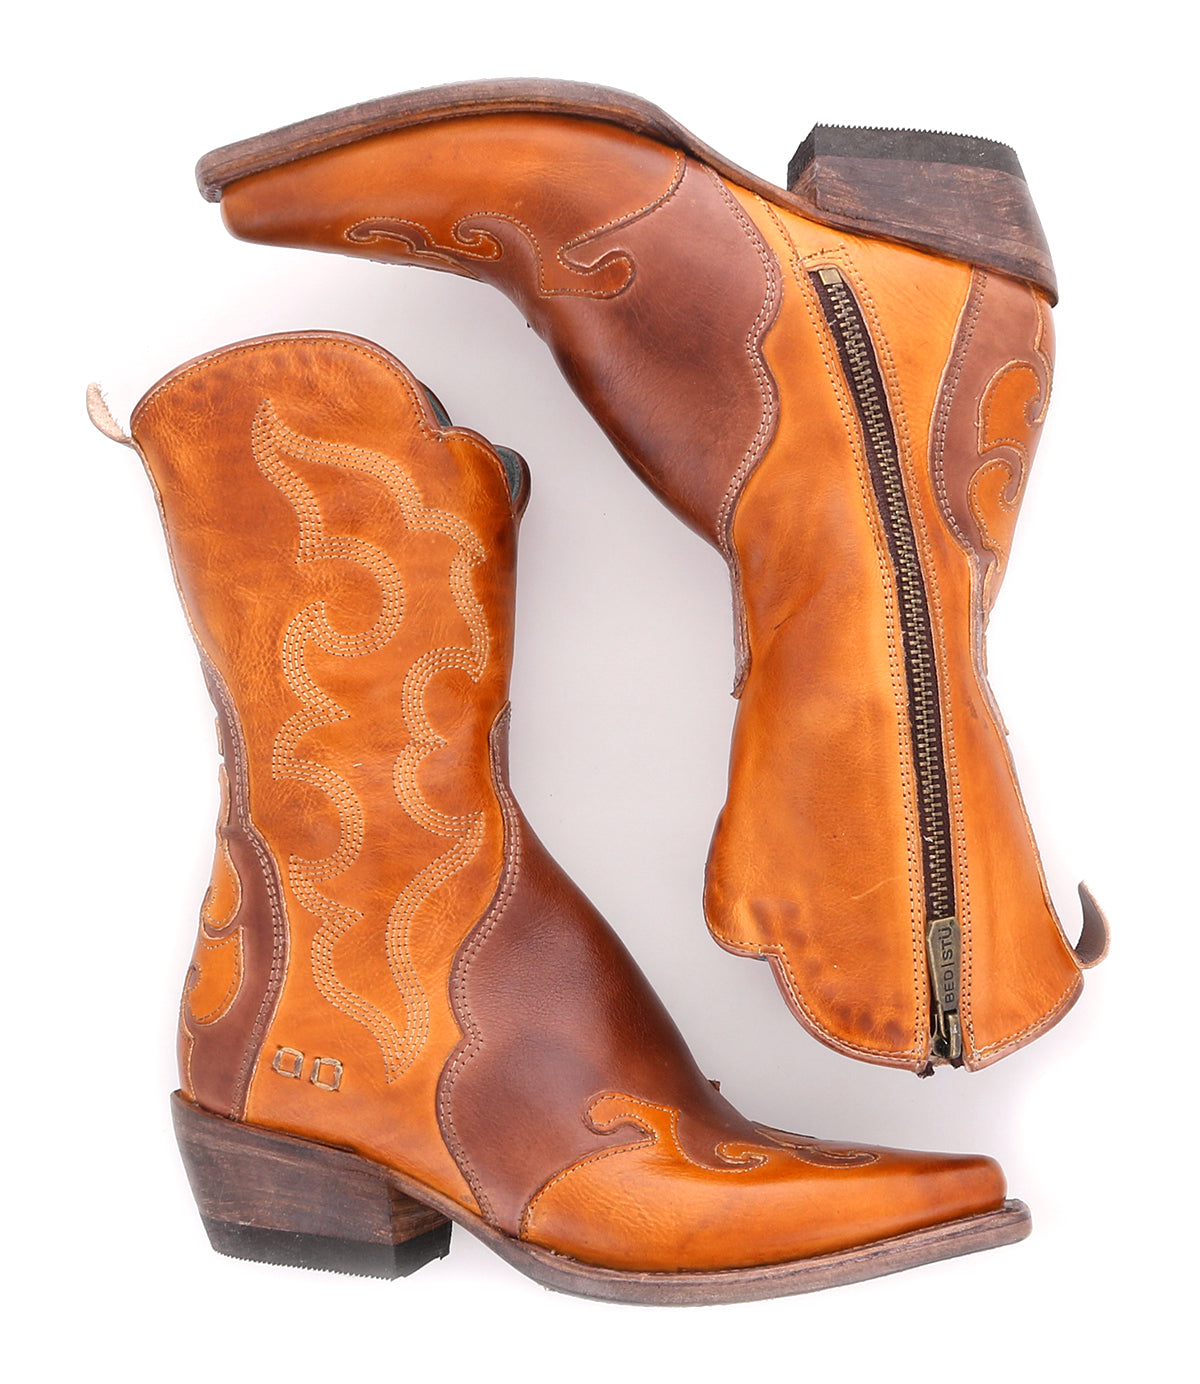 A pair of Deuce leather cowboy boots from Bed Stu with rustic charm and a zipper on the side.